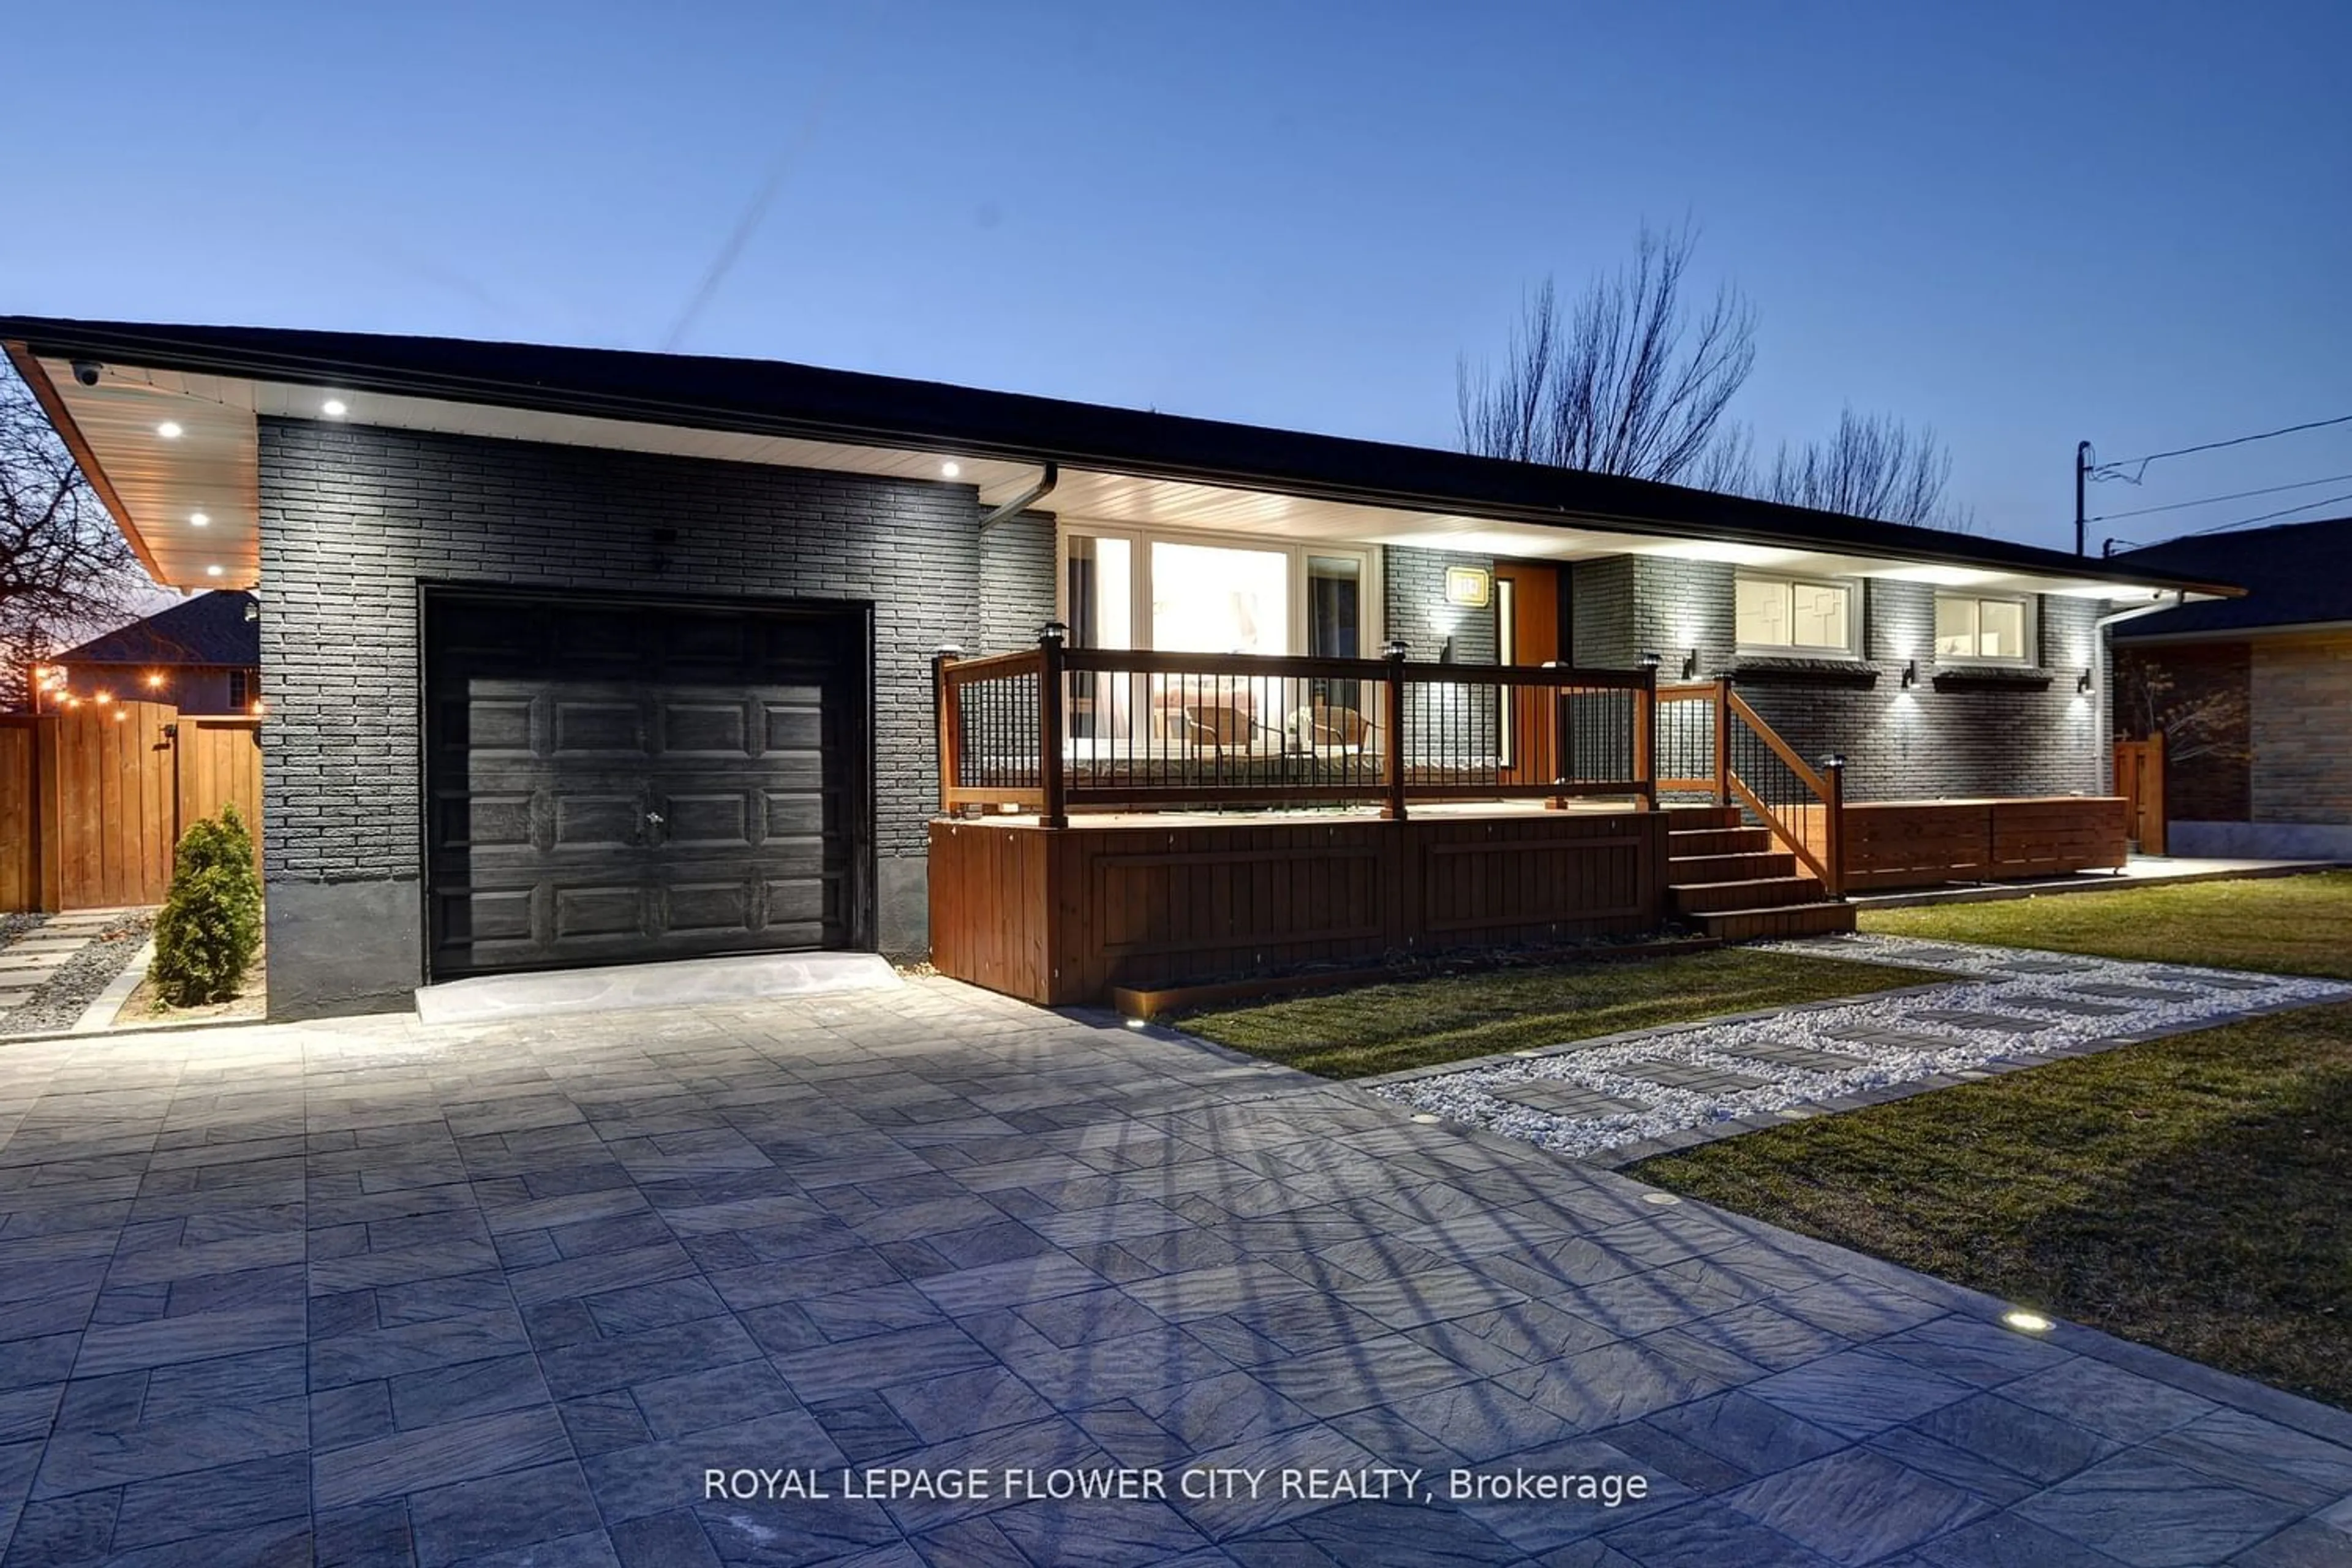 Home with brick exterior material for 15 Andres St, Niagara-on-the-Lake Ontario L0S 1J0